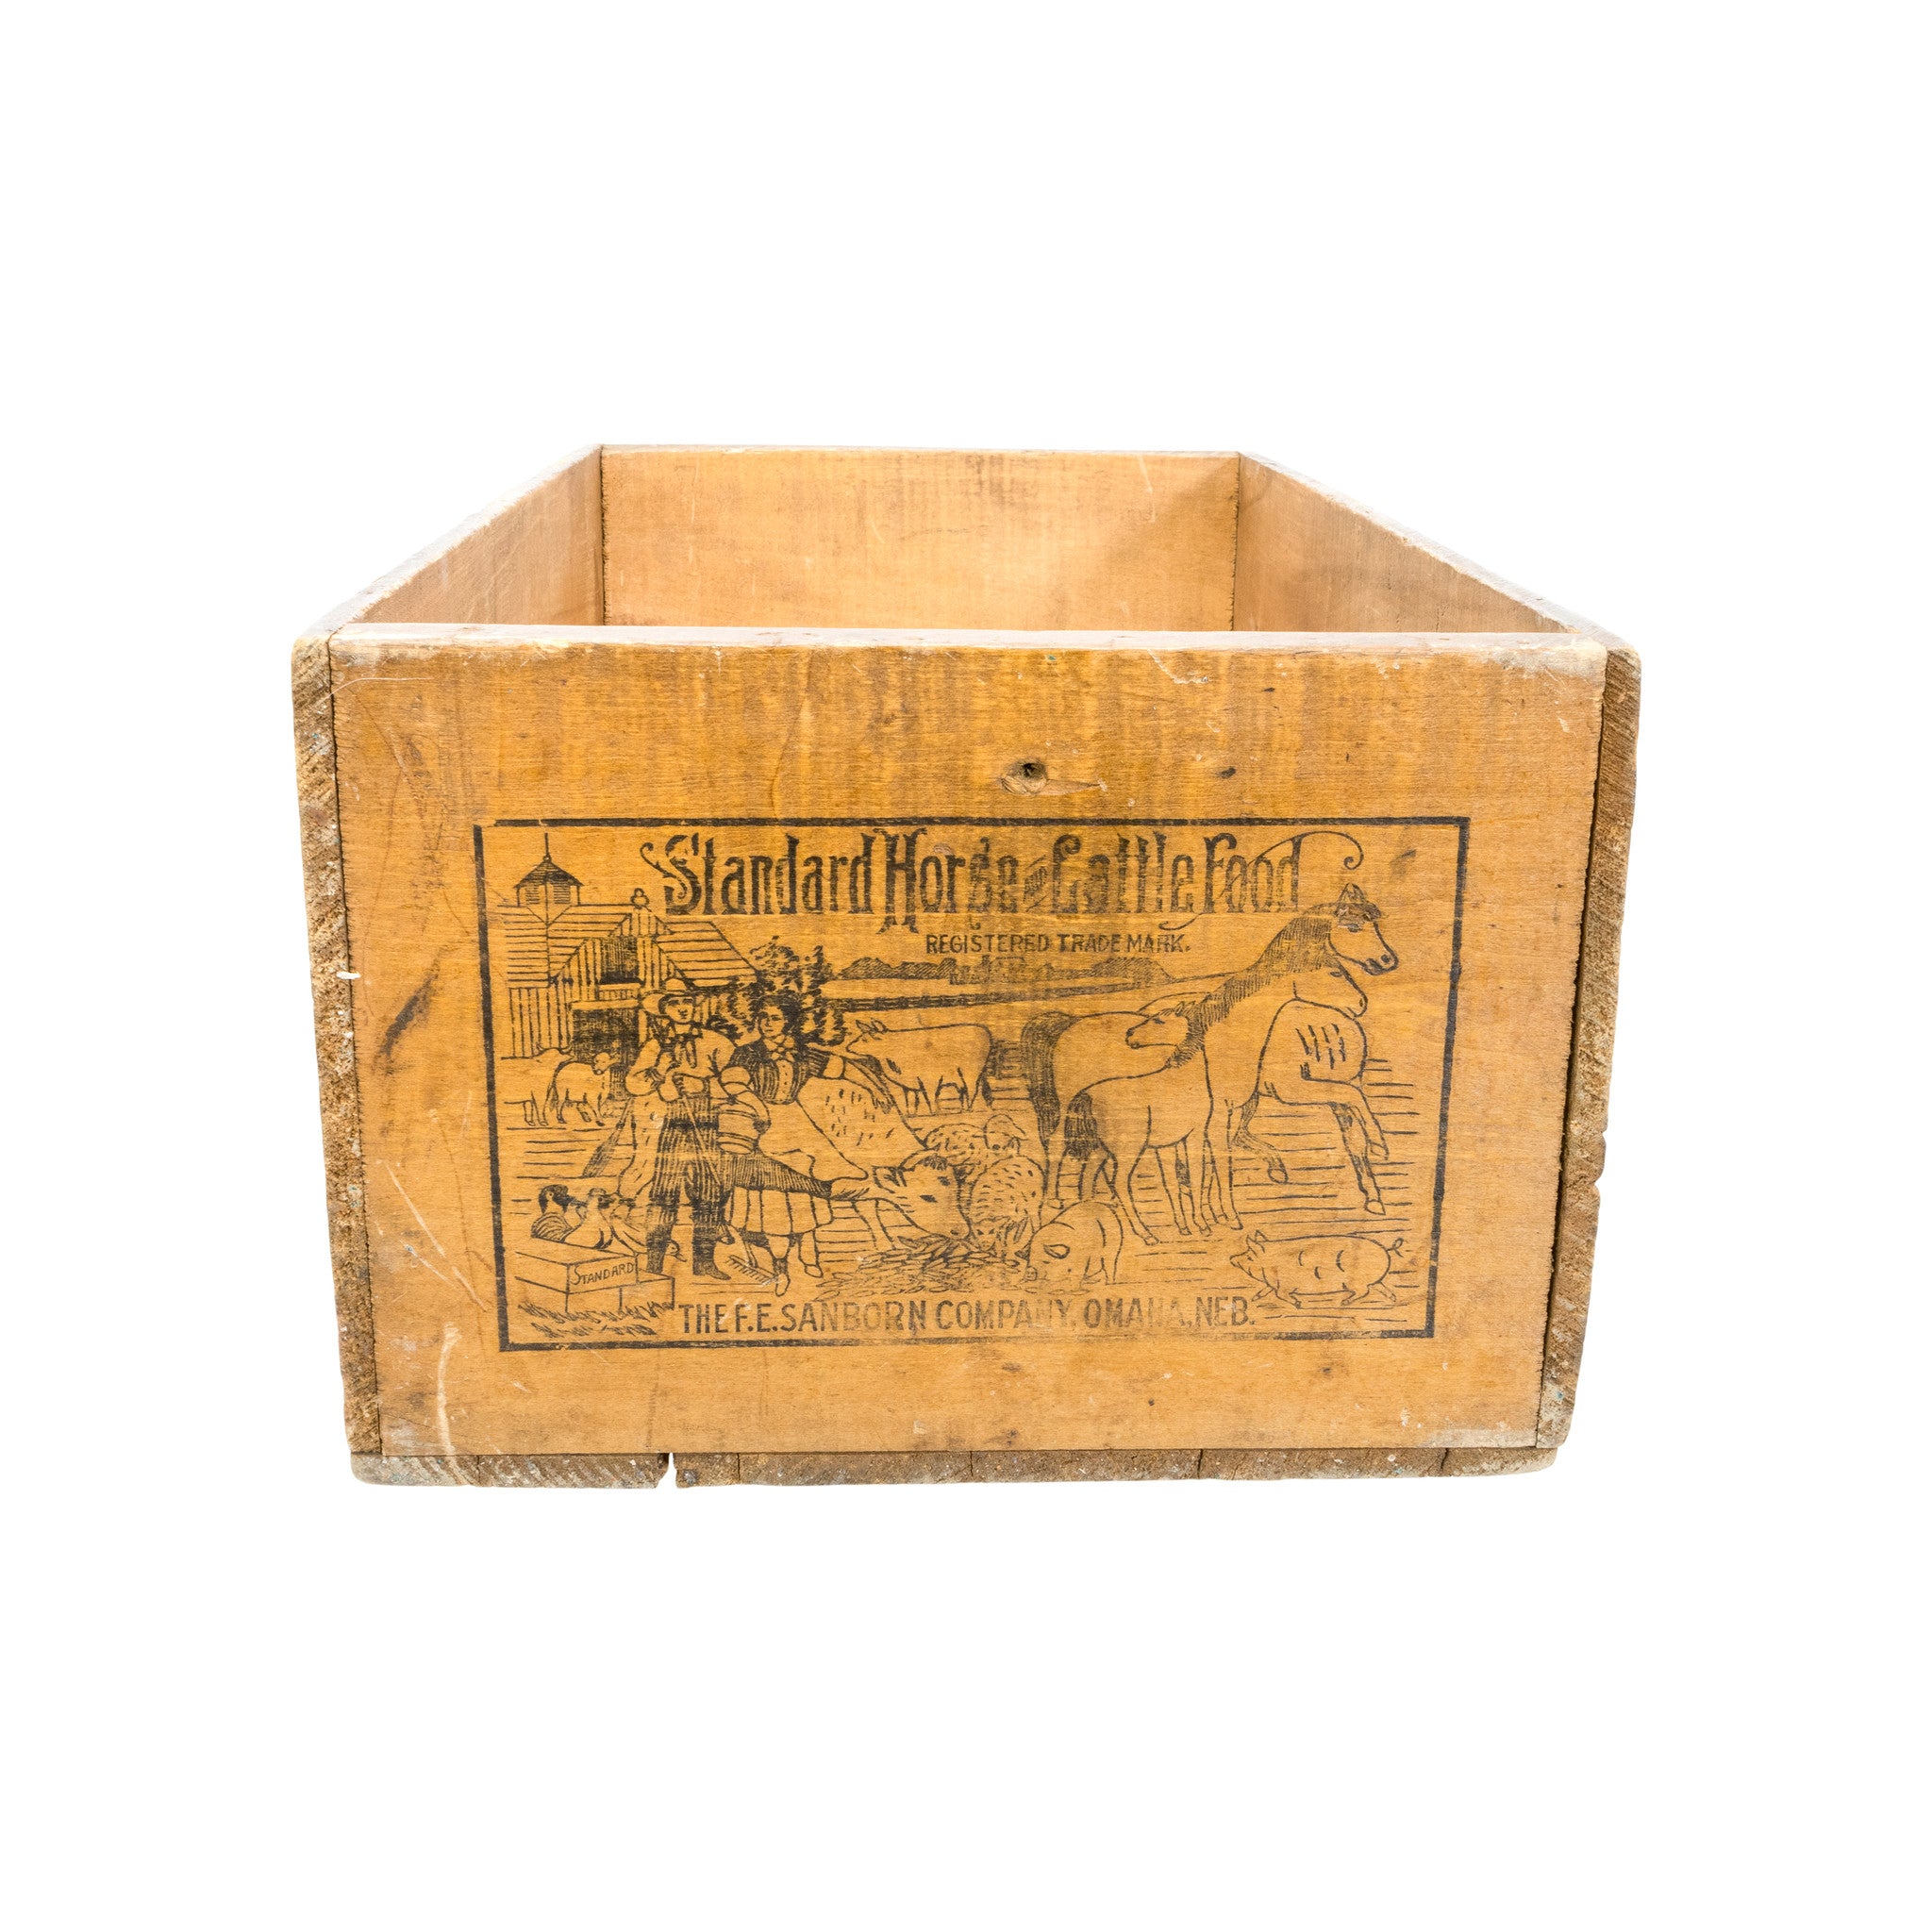 Standard Horse and Cattle Food Wood Box